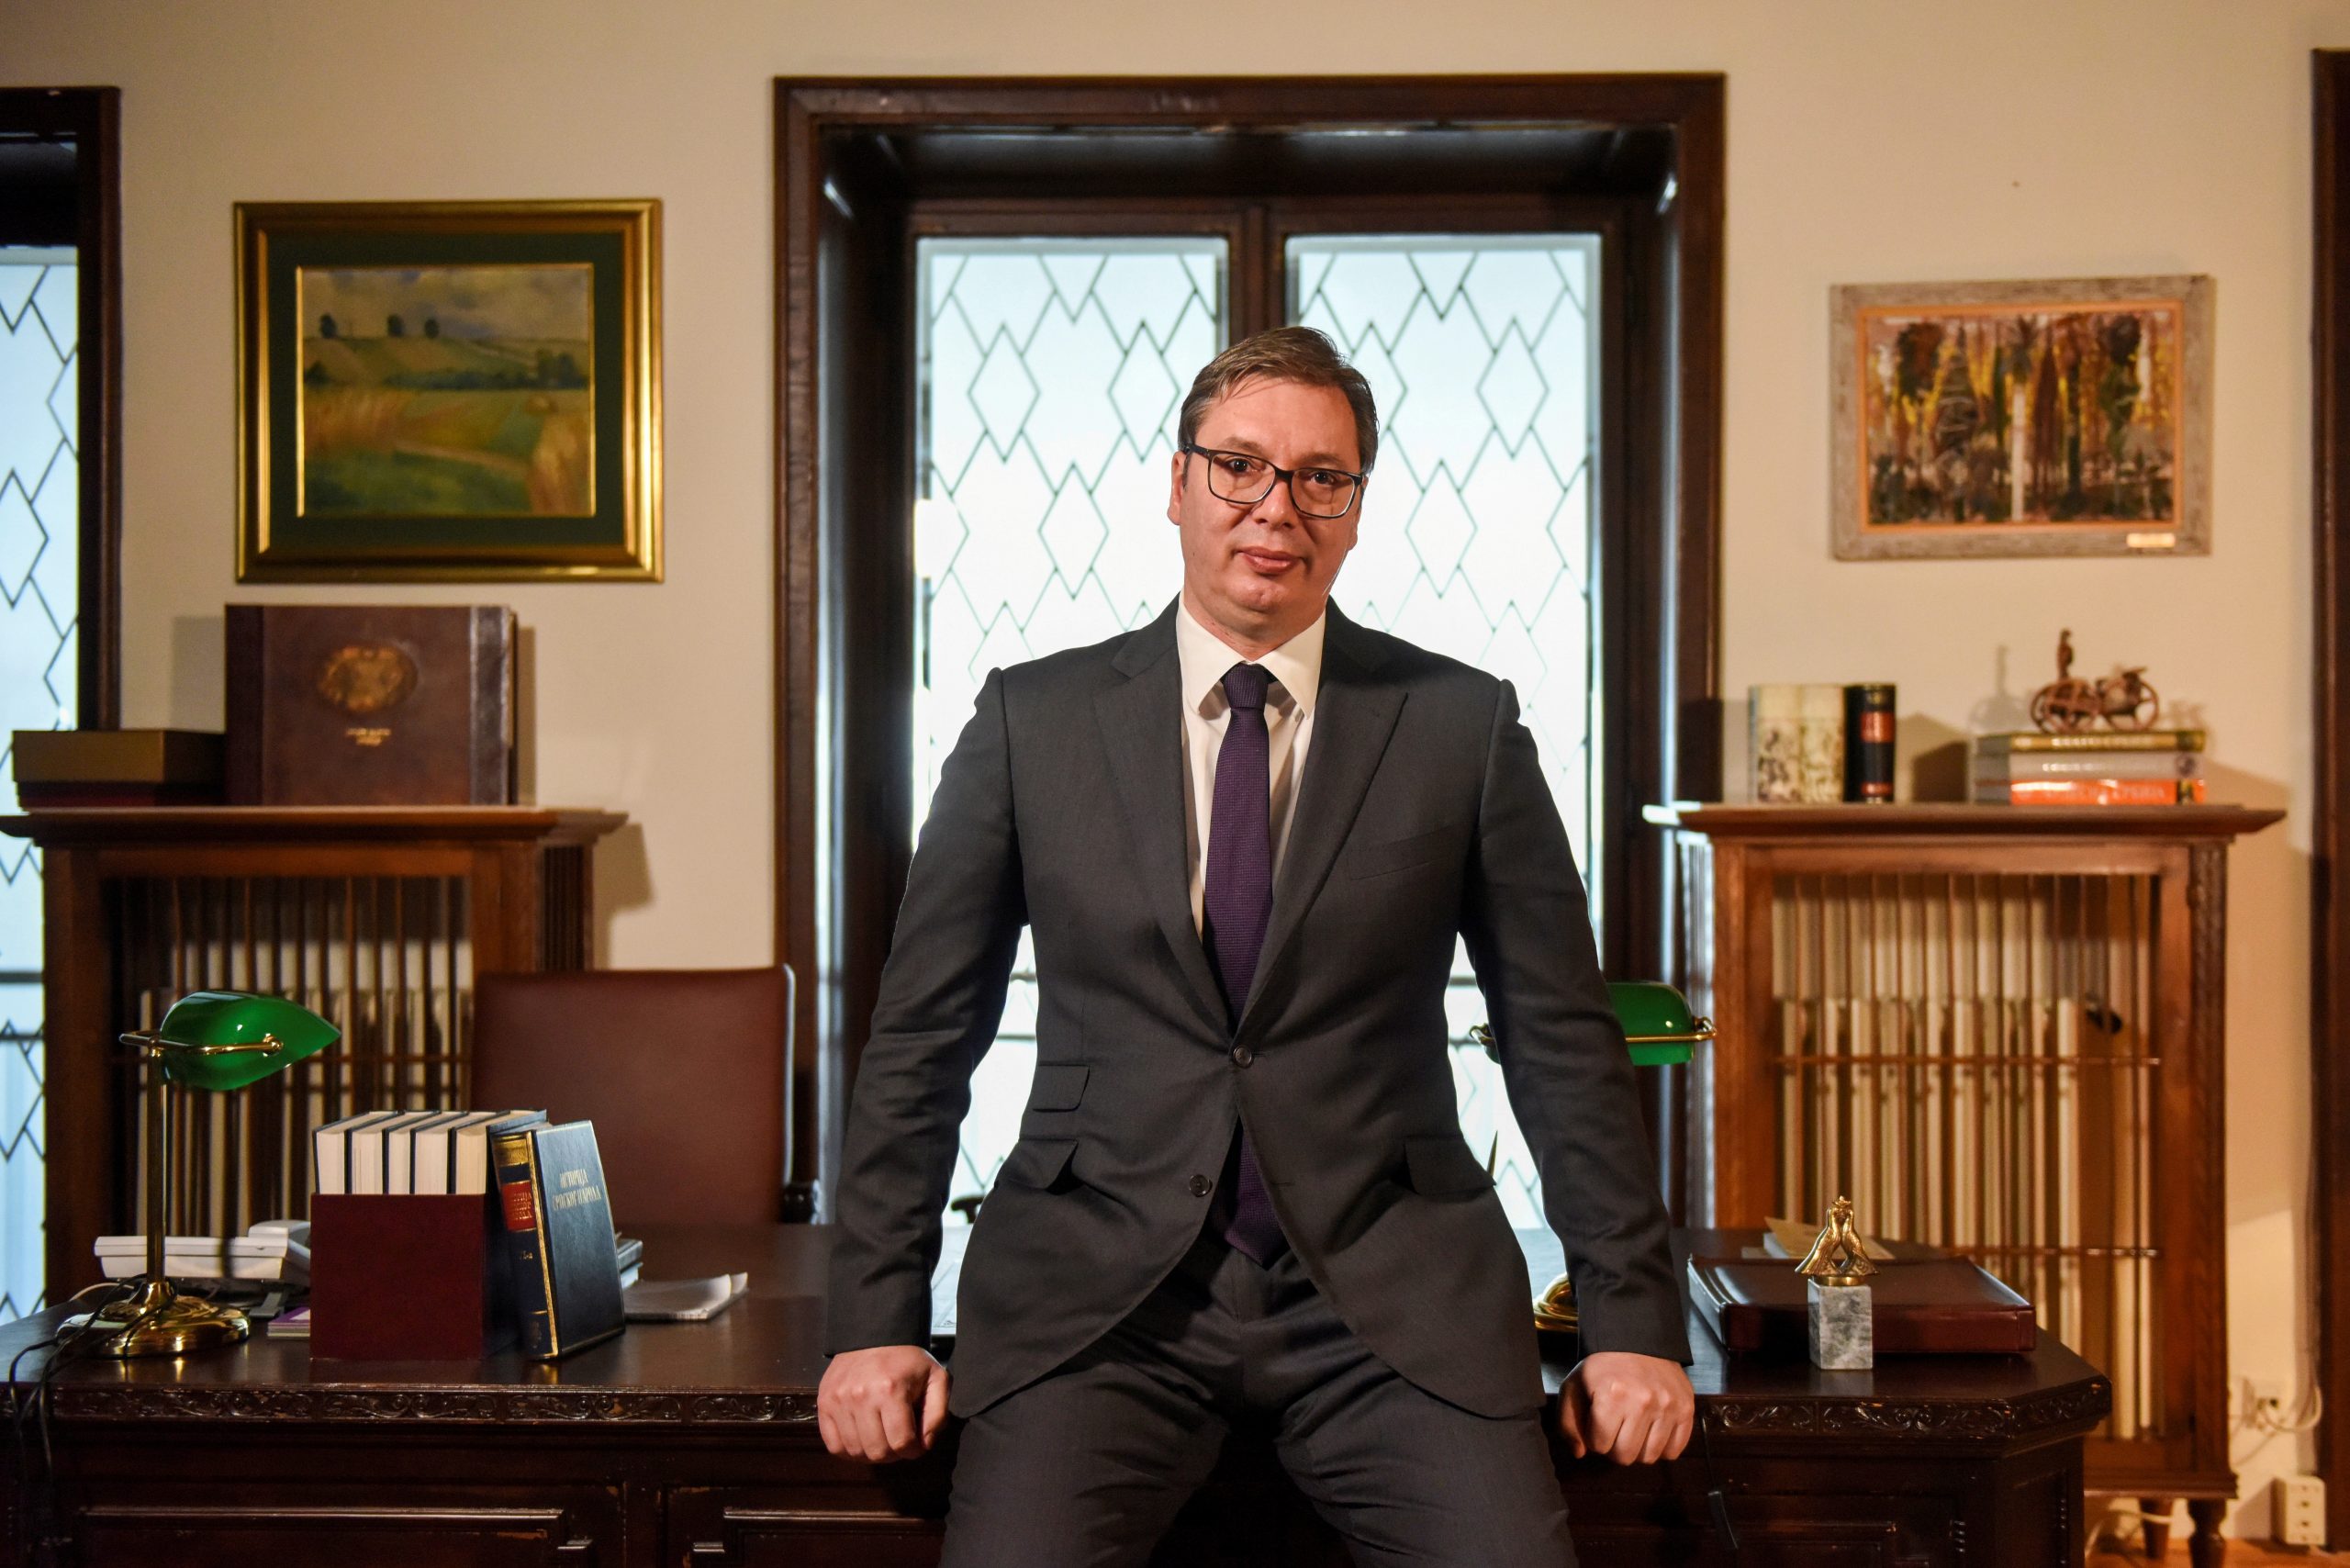 FILE PHOTO: Serbian President Aleksandar Vucic poses during an interview with Reuters in Belgrade FILE PHOTO: Serbian President Aleksandar Vucic poses during an interview with Reuters in Belgrade, Serbia, February 5, 2021. REUTERS/Zorana Jevtic/File Photo ZORANA JEVTIC